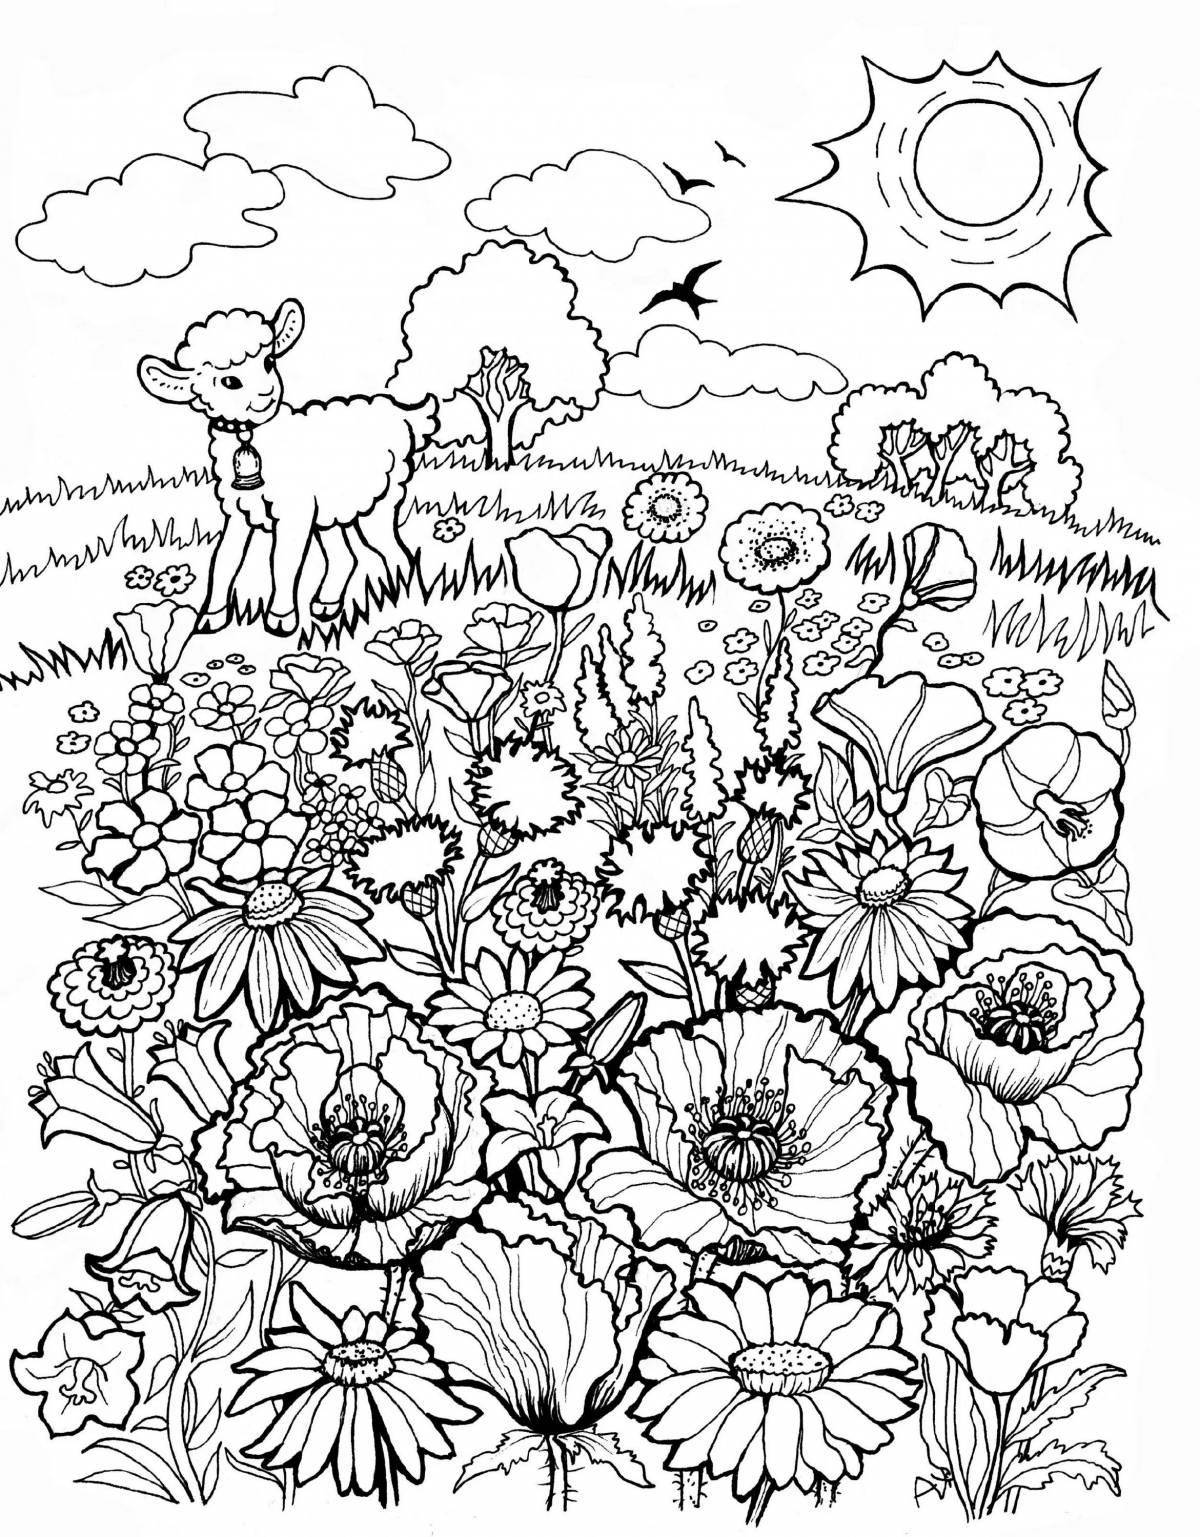 Coloring page nice moms-to-be